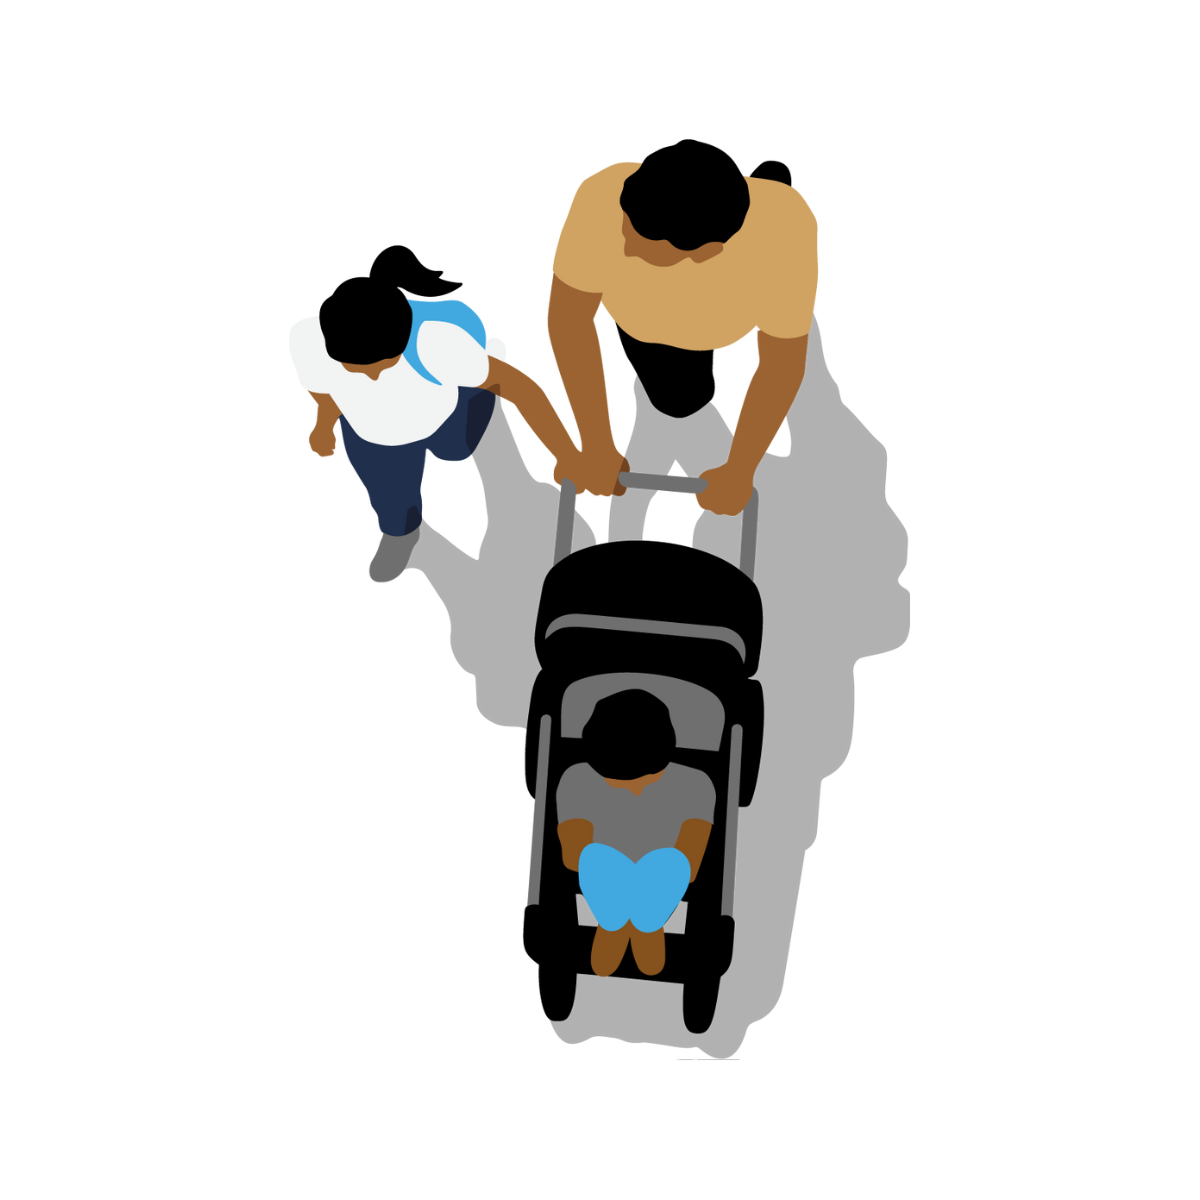 a man pushes a pram with a small child inside, while a little girl holds on to the pram at his side